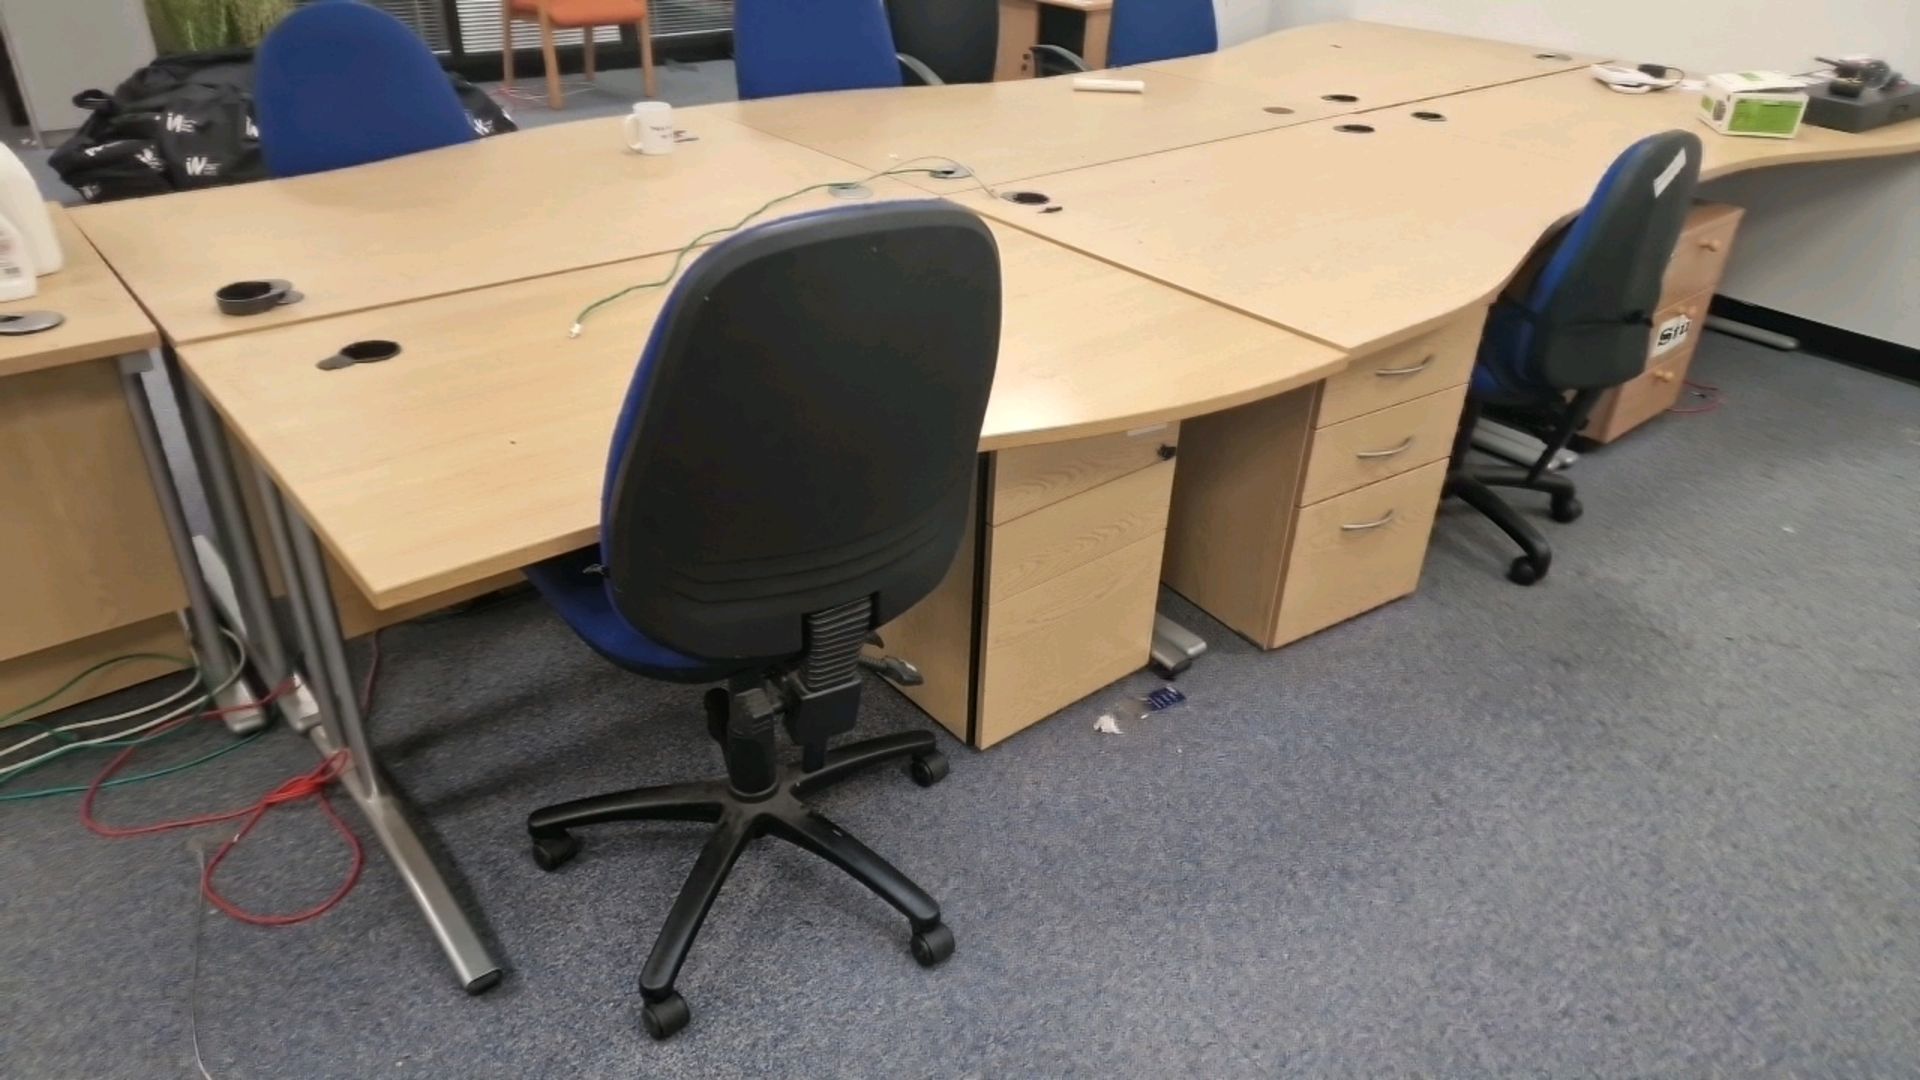 Wooden Effect Office Desks x7 With Office Chairs x6 - Image 2 of 3